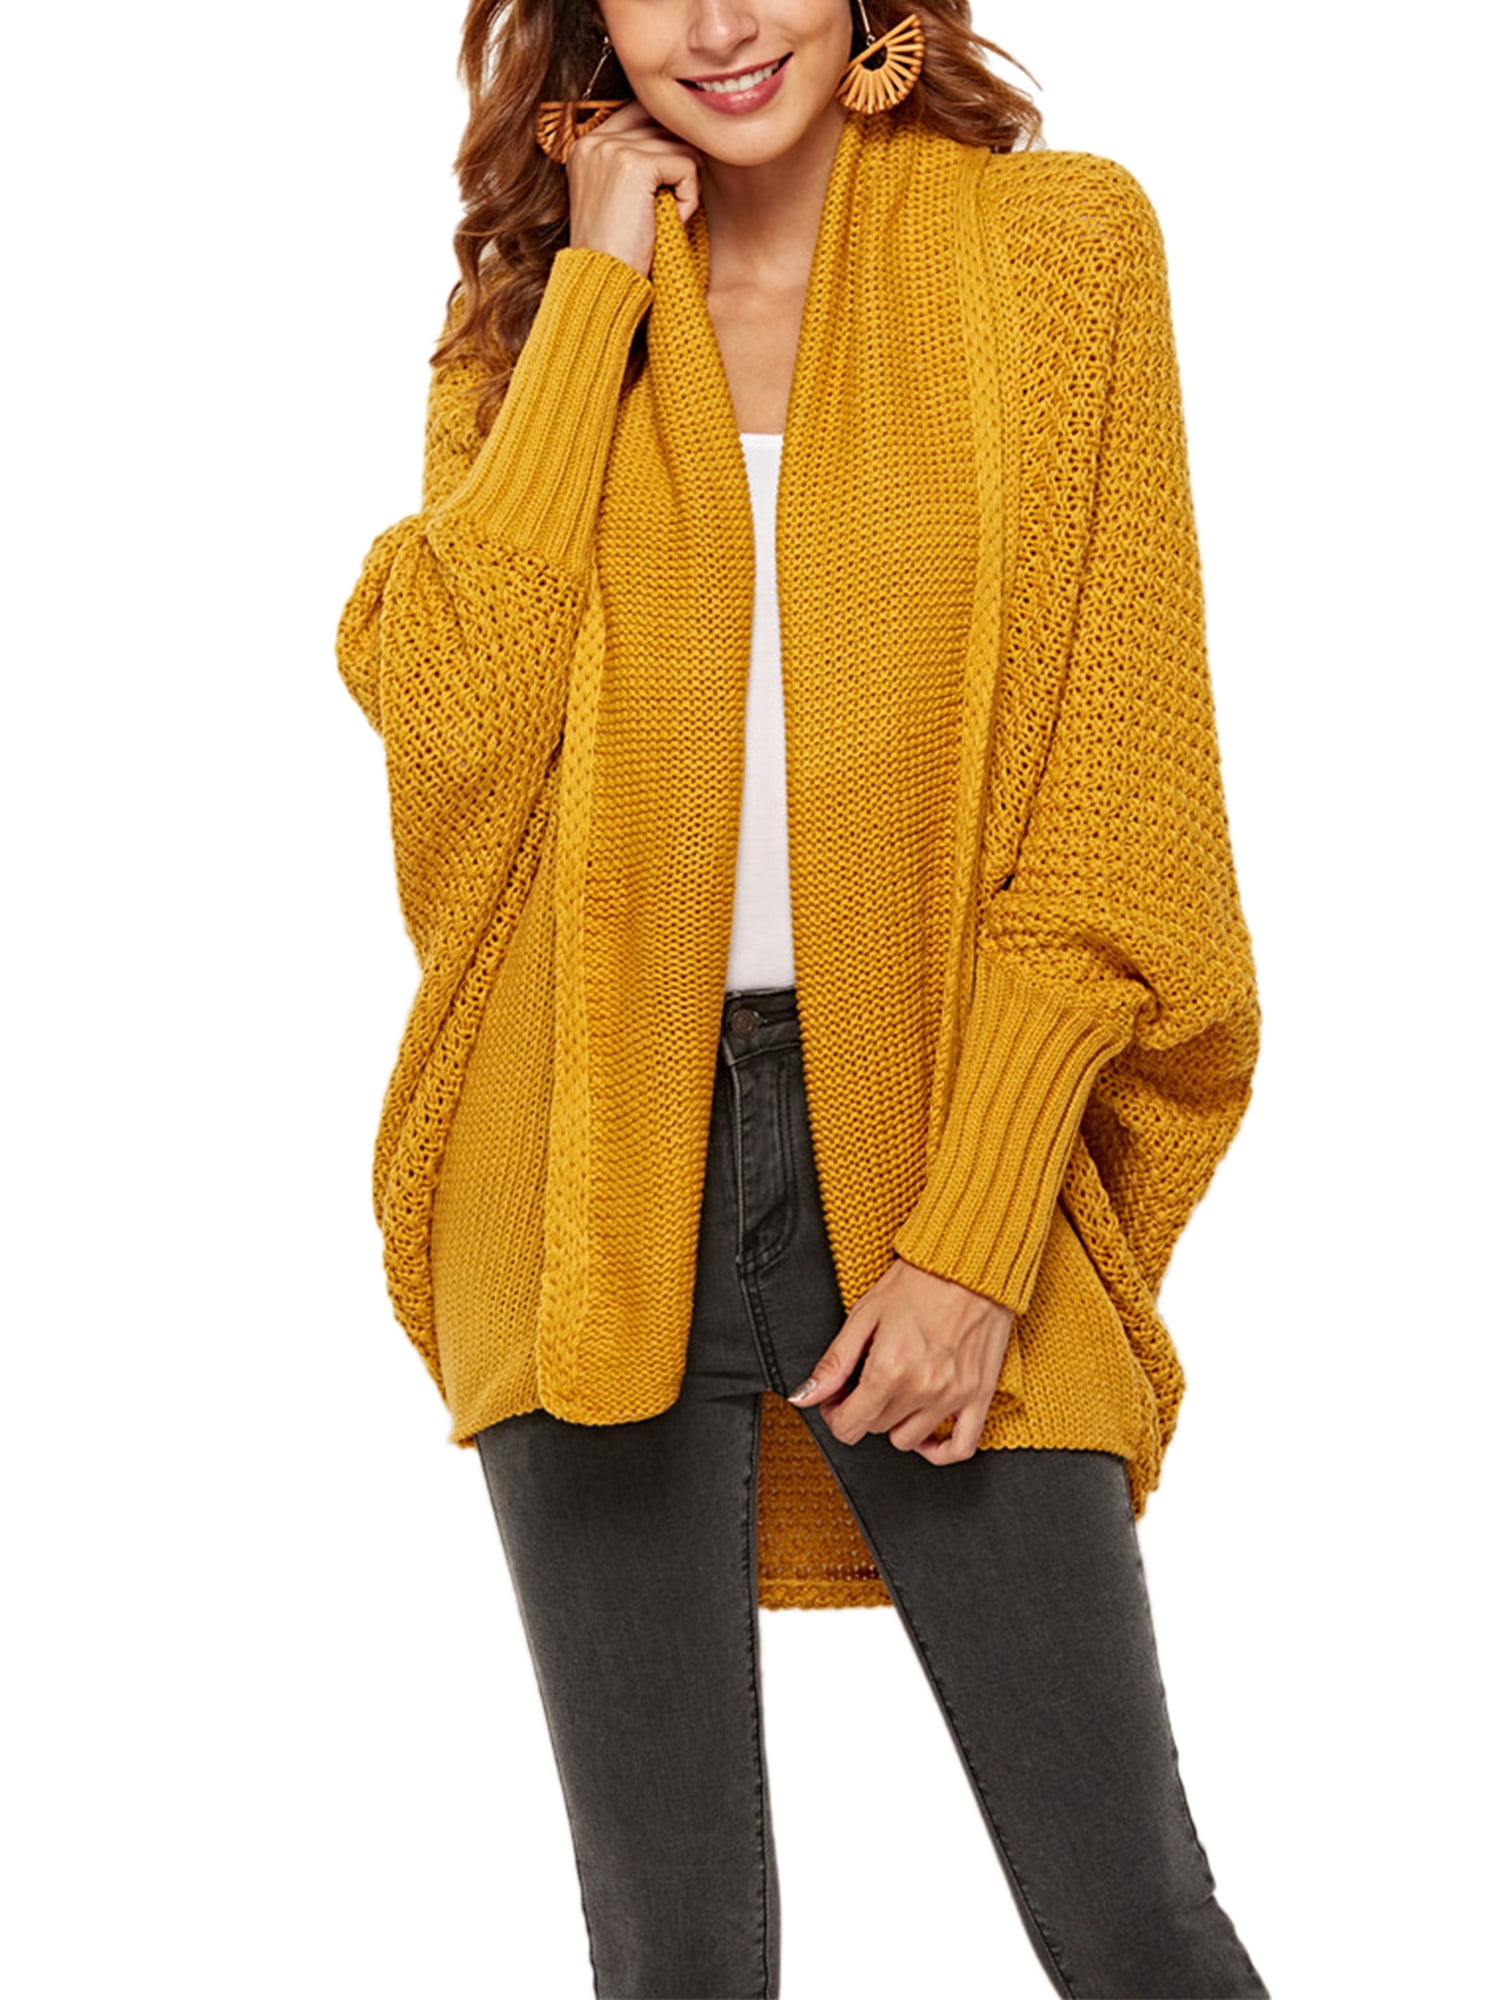 Women's Knitted Cape Cardigan Sweater Batwing Long Sleeve Coat Outwear Pullover# 